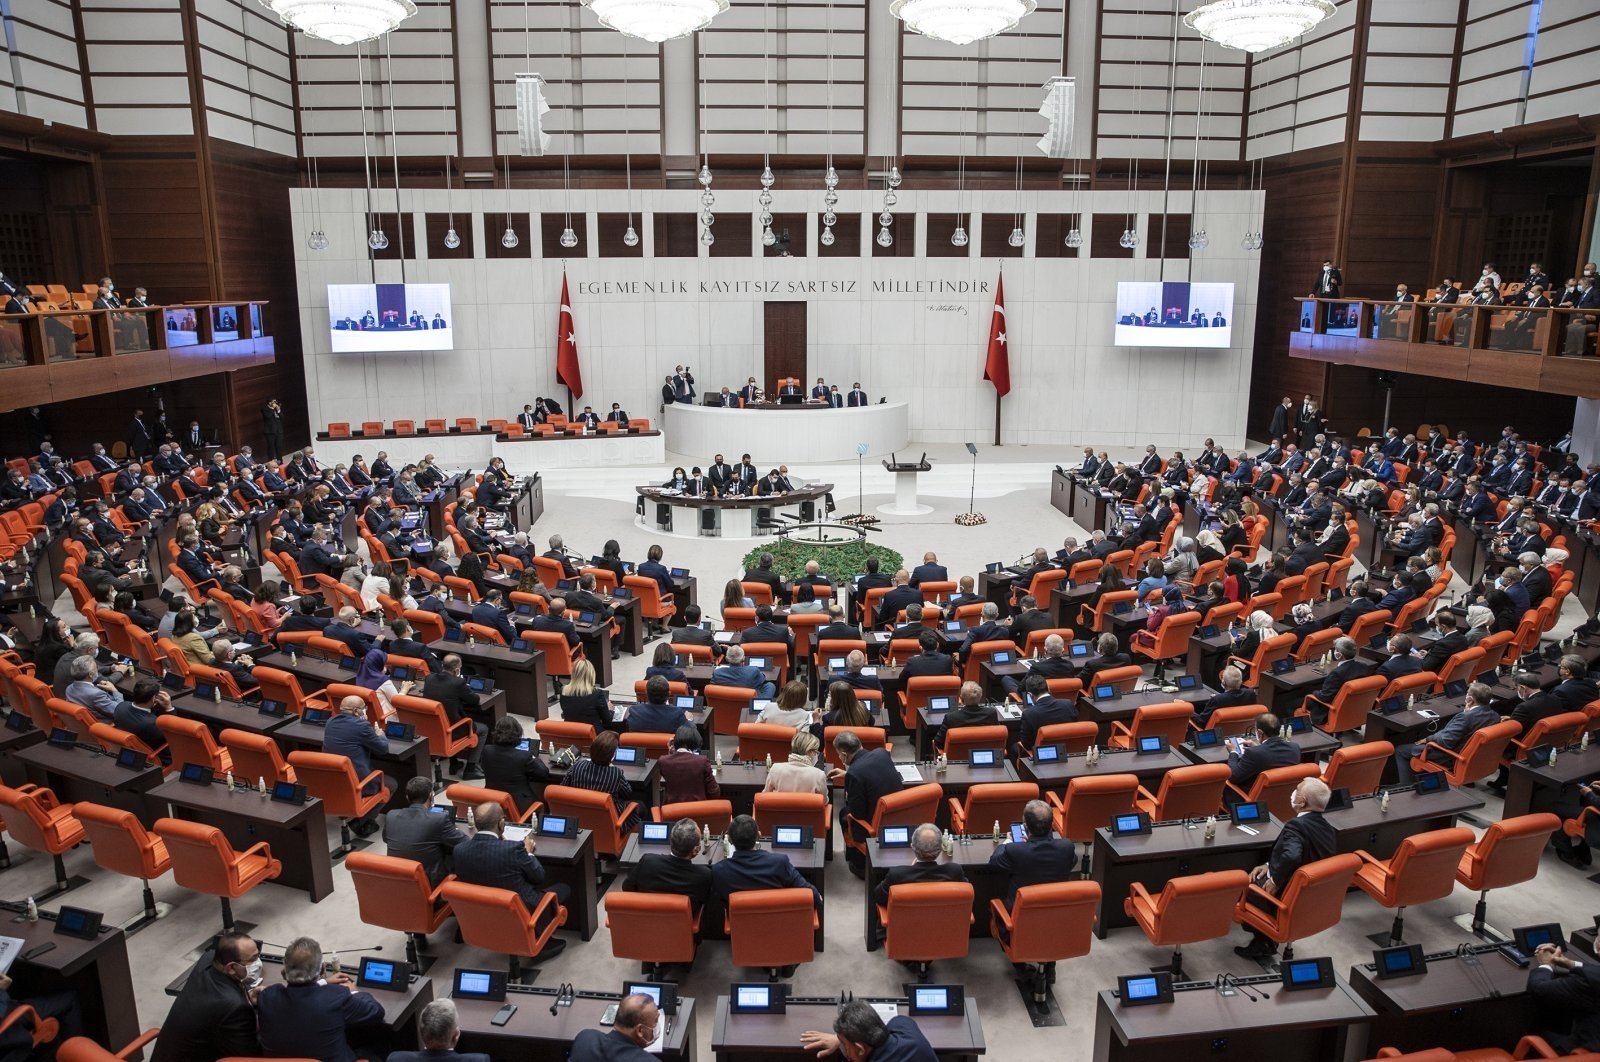 The Turkish Grand National Assembly (TBMM) convenes for the opening ceremony of the fifth legislative year of its 27th term, the capital Ankara, Türkiye, Oct. 1, 2021. (AA Photo)